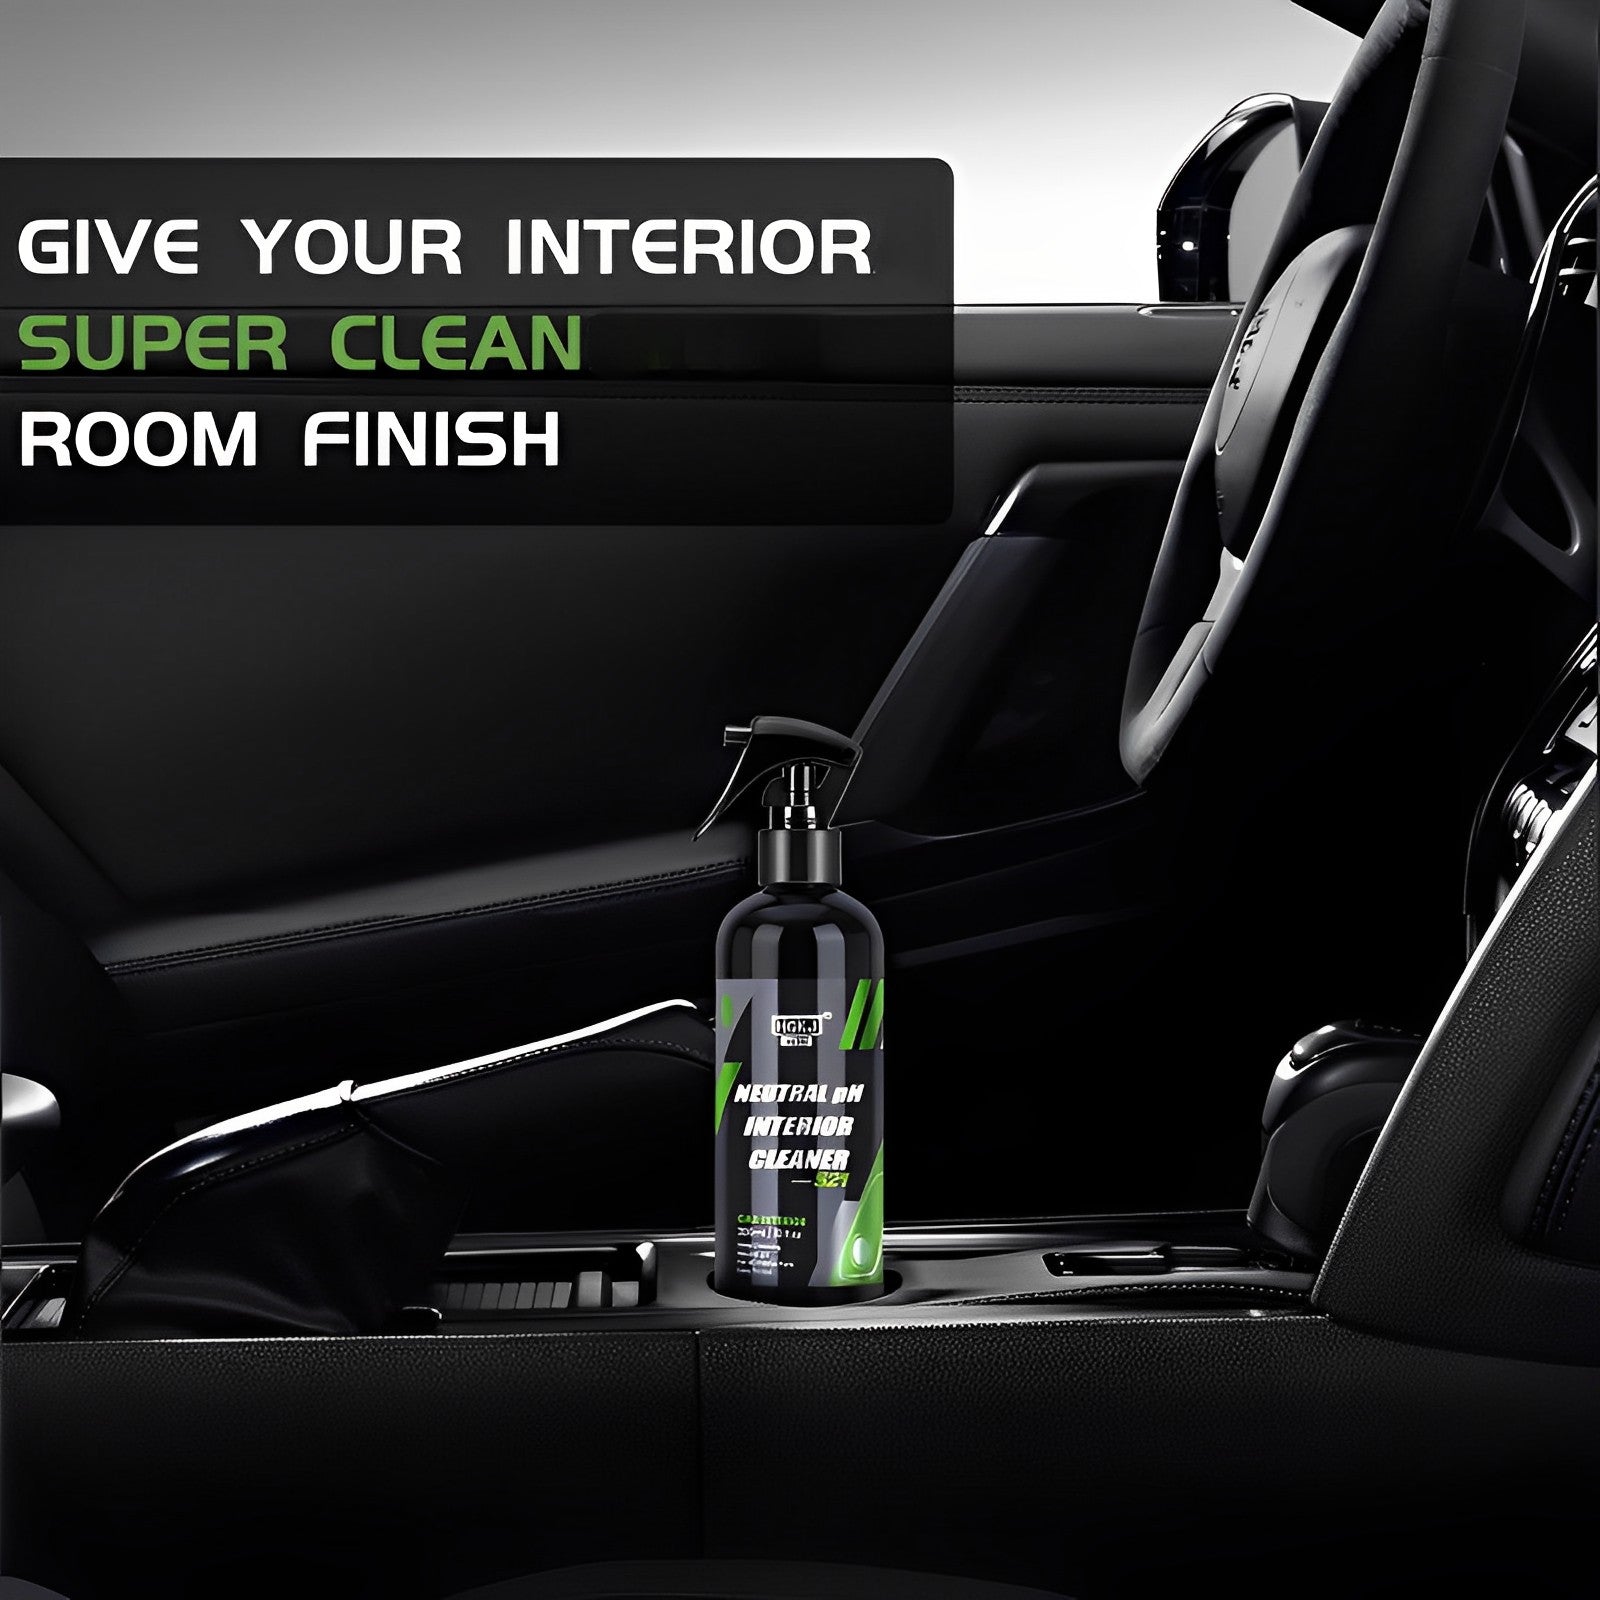 Sisbrill 361 All Purpose Car Cleaner Interior and Exterior